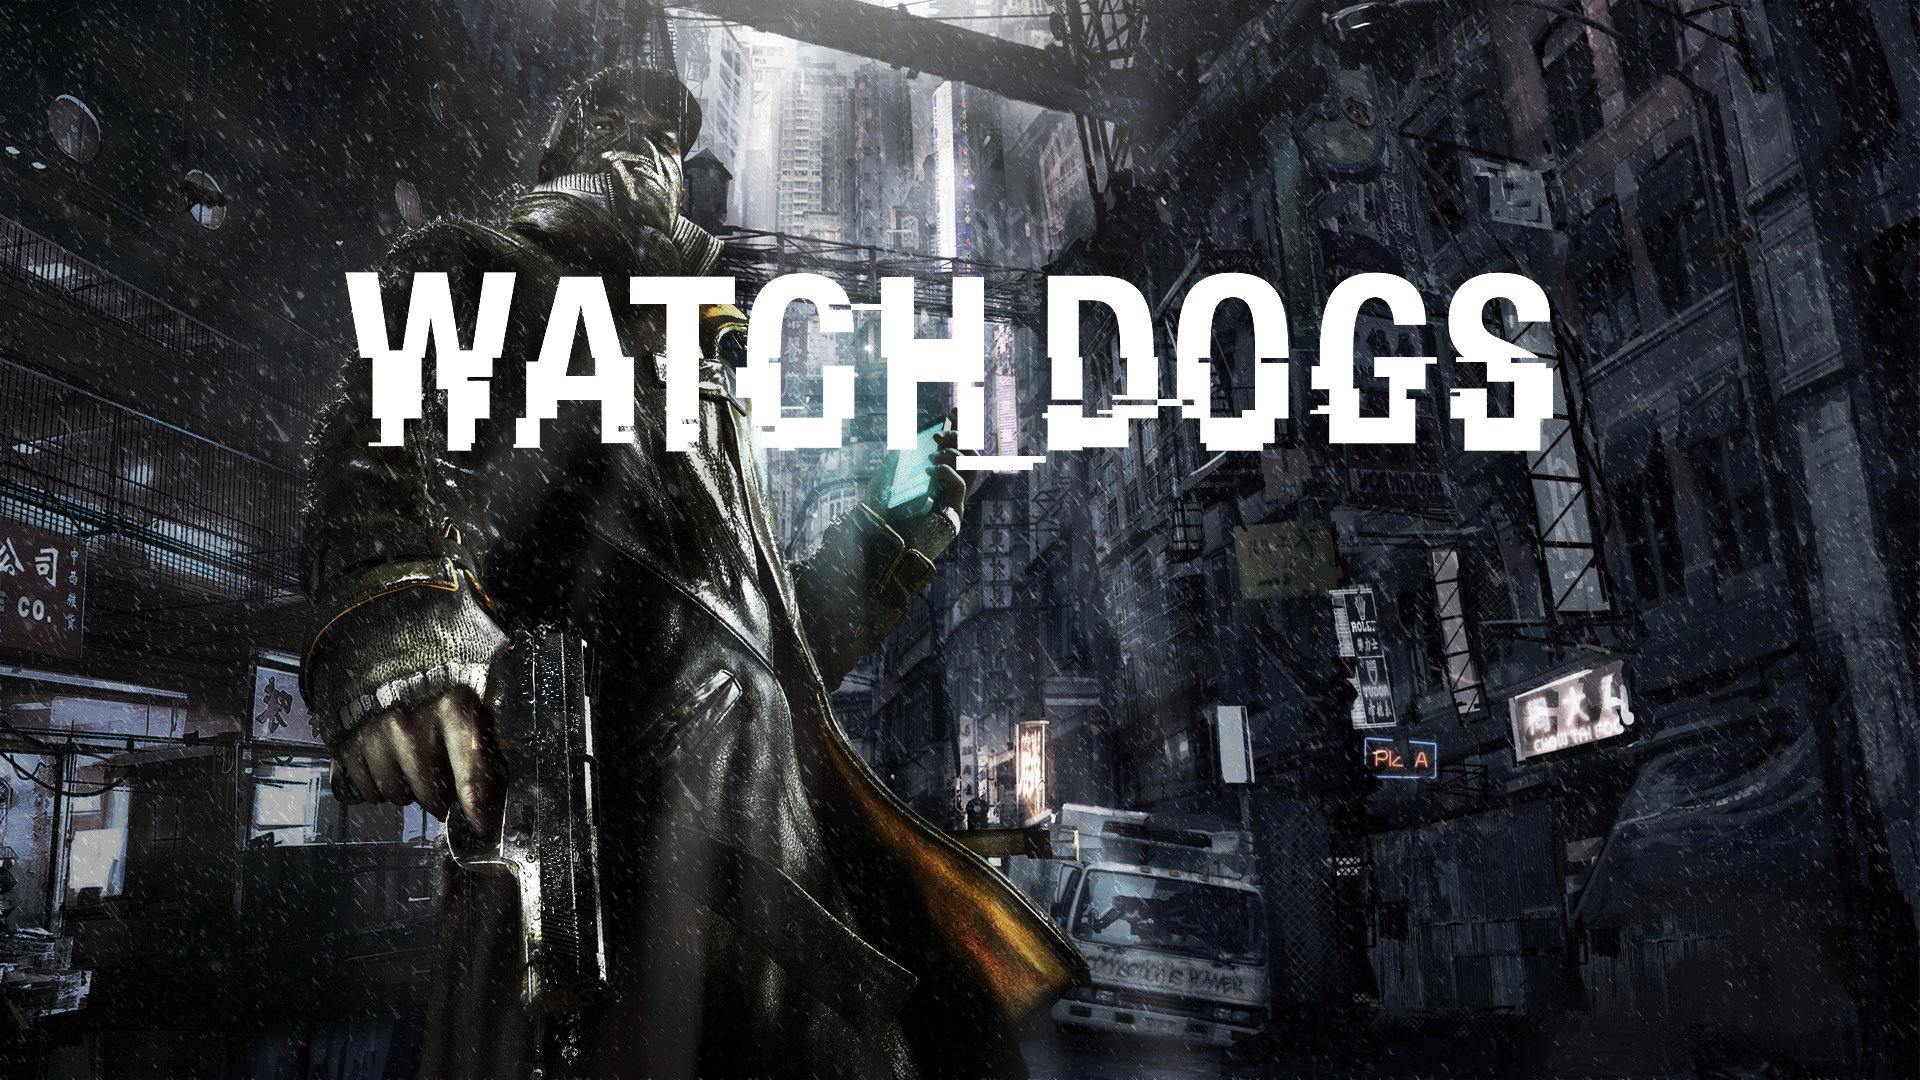 Best Watch Dogs background ID:117277 for High Resolution 1080p computer